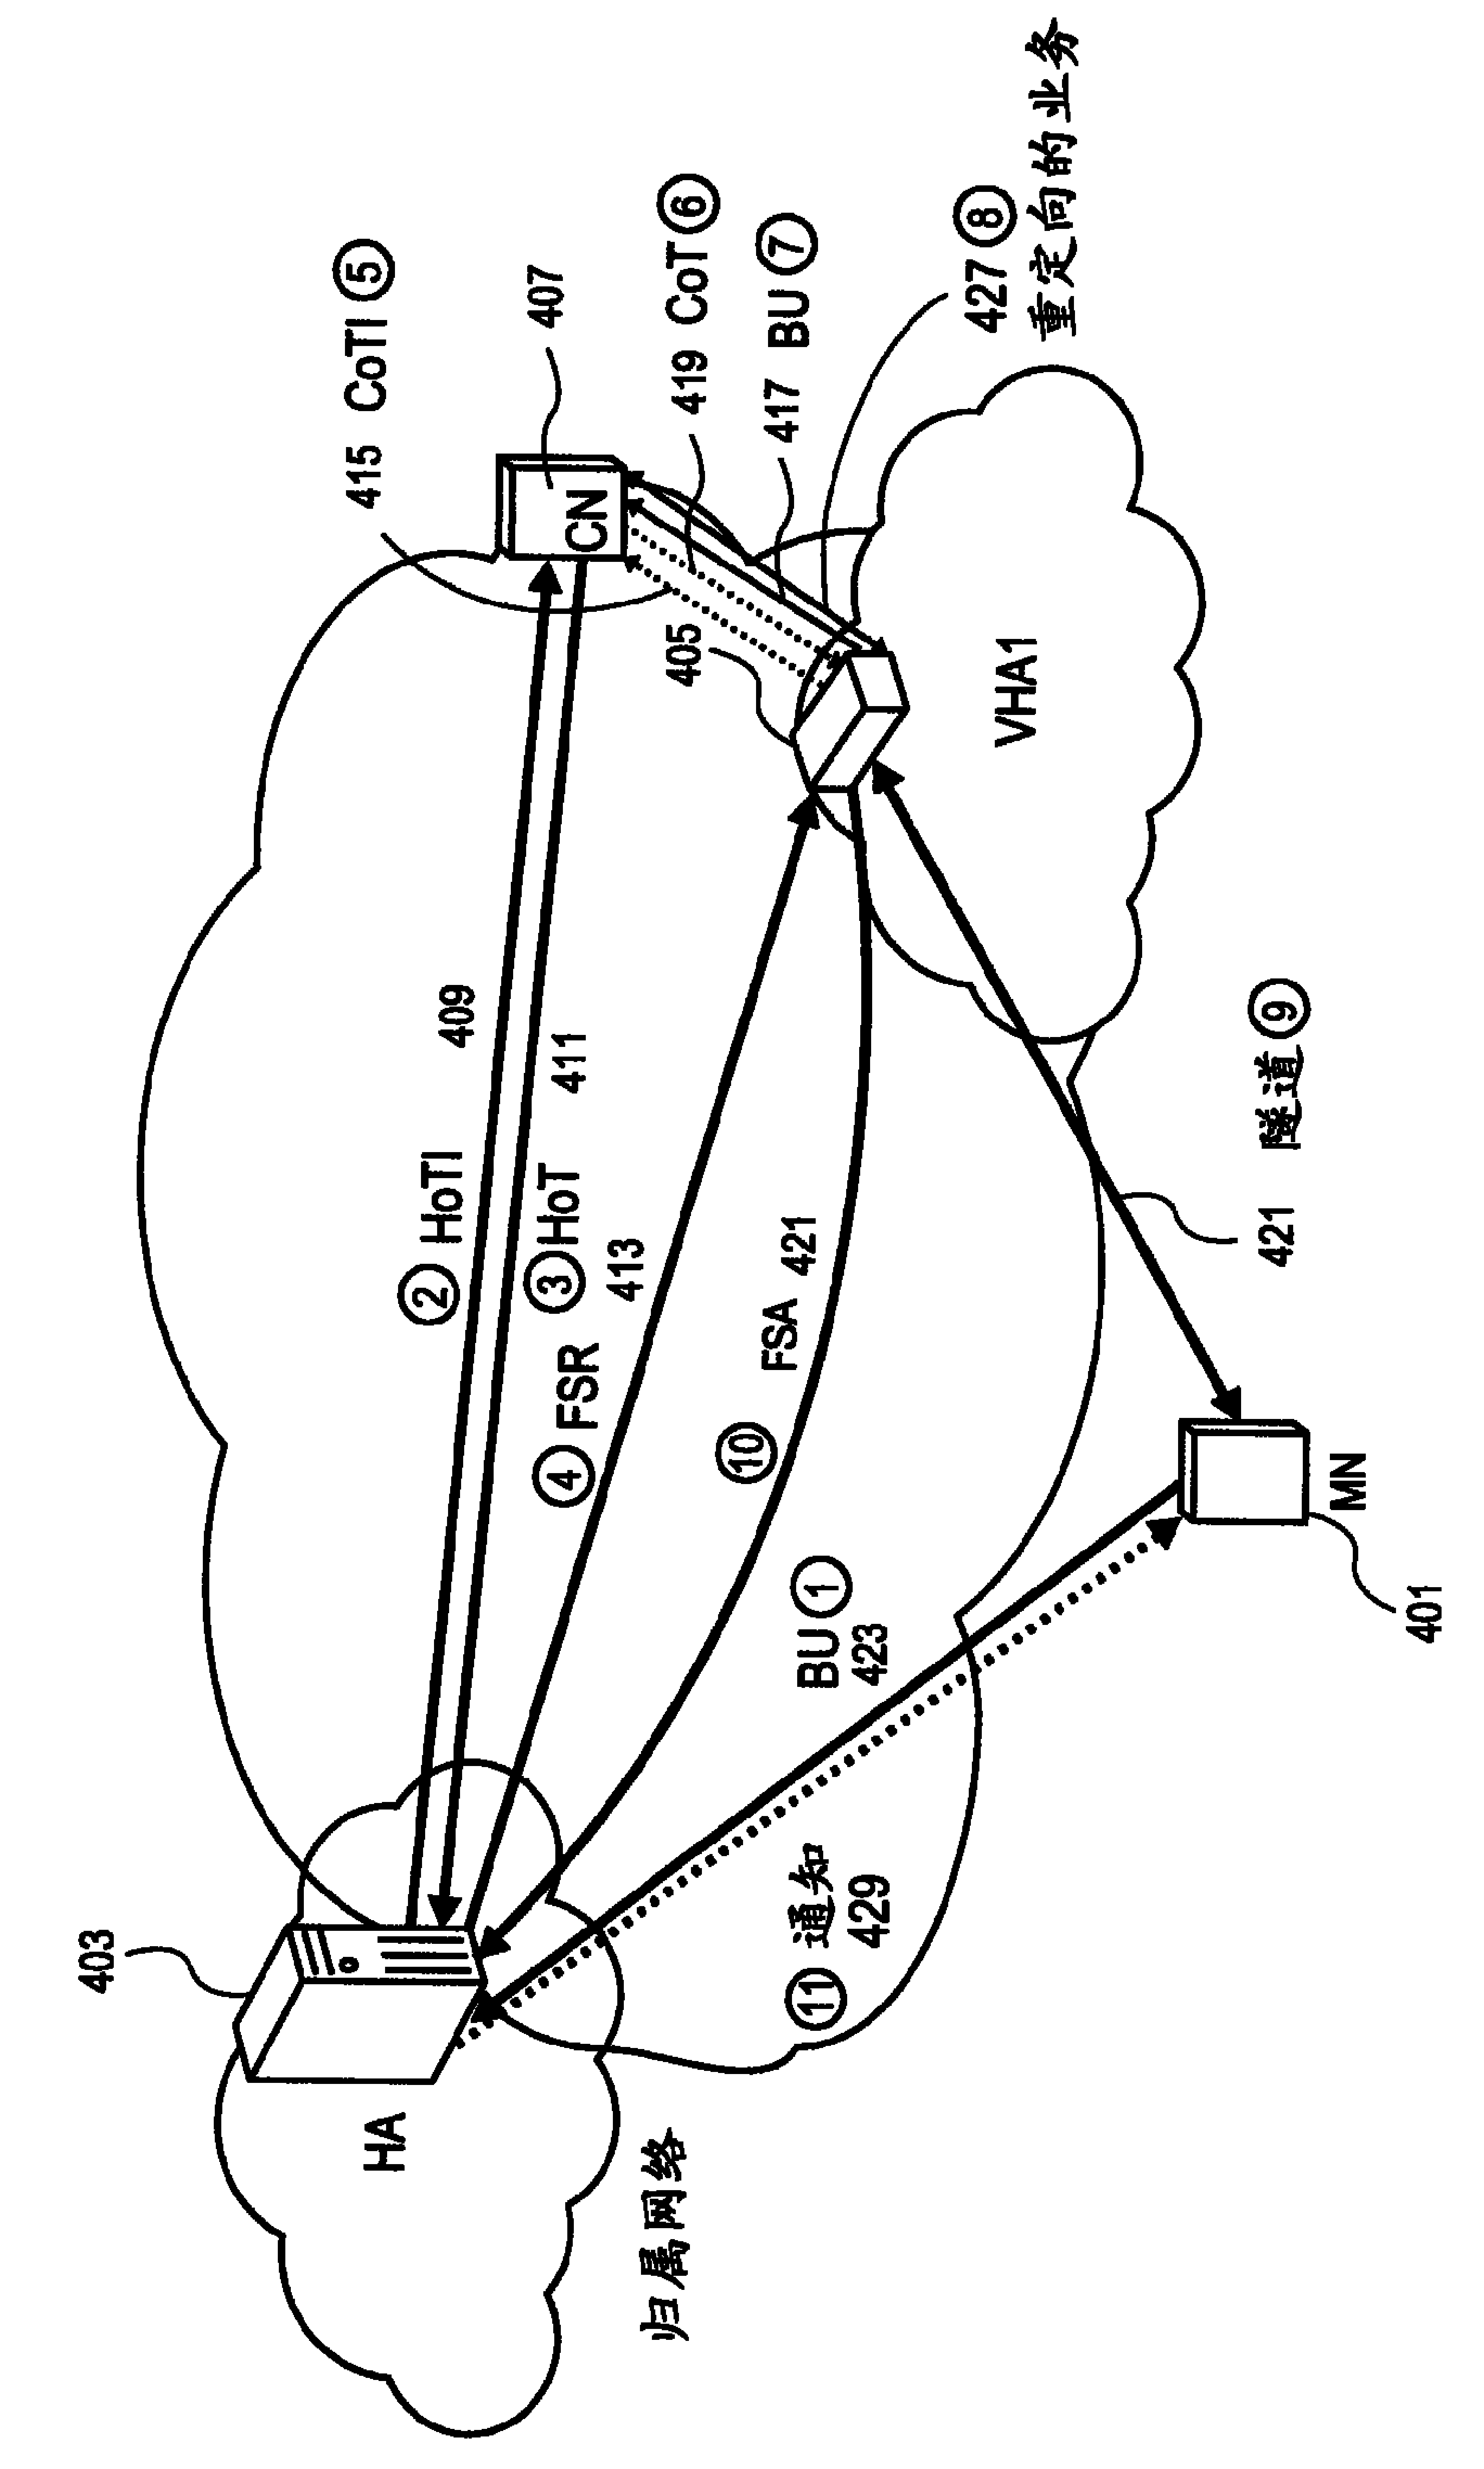 System and method for providing mobility with a split home agent architecture